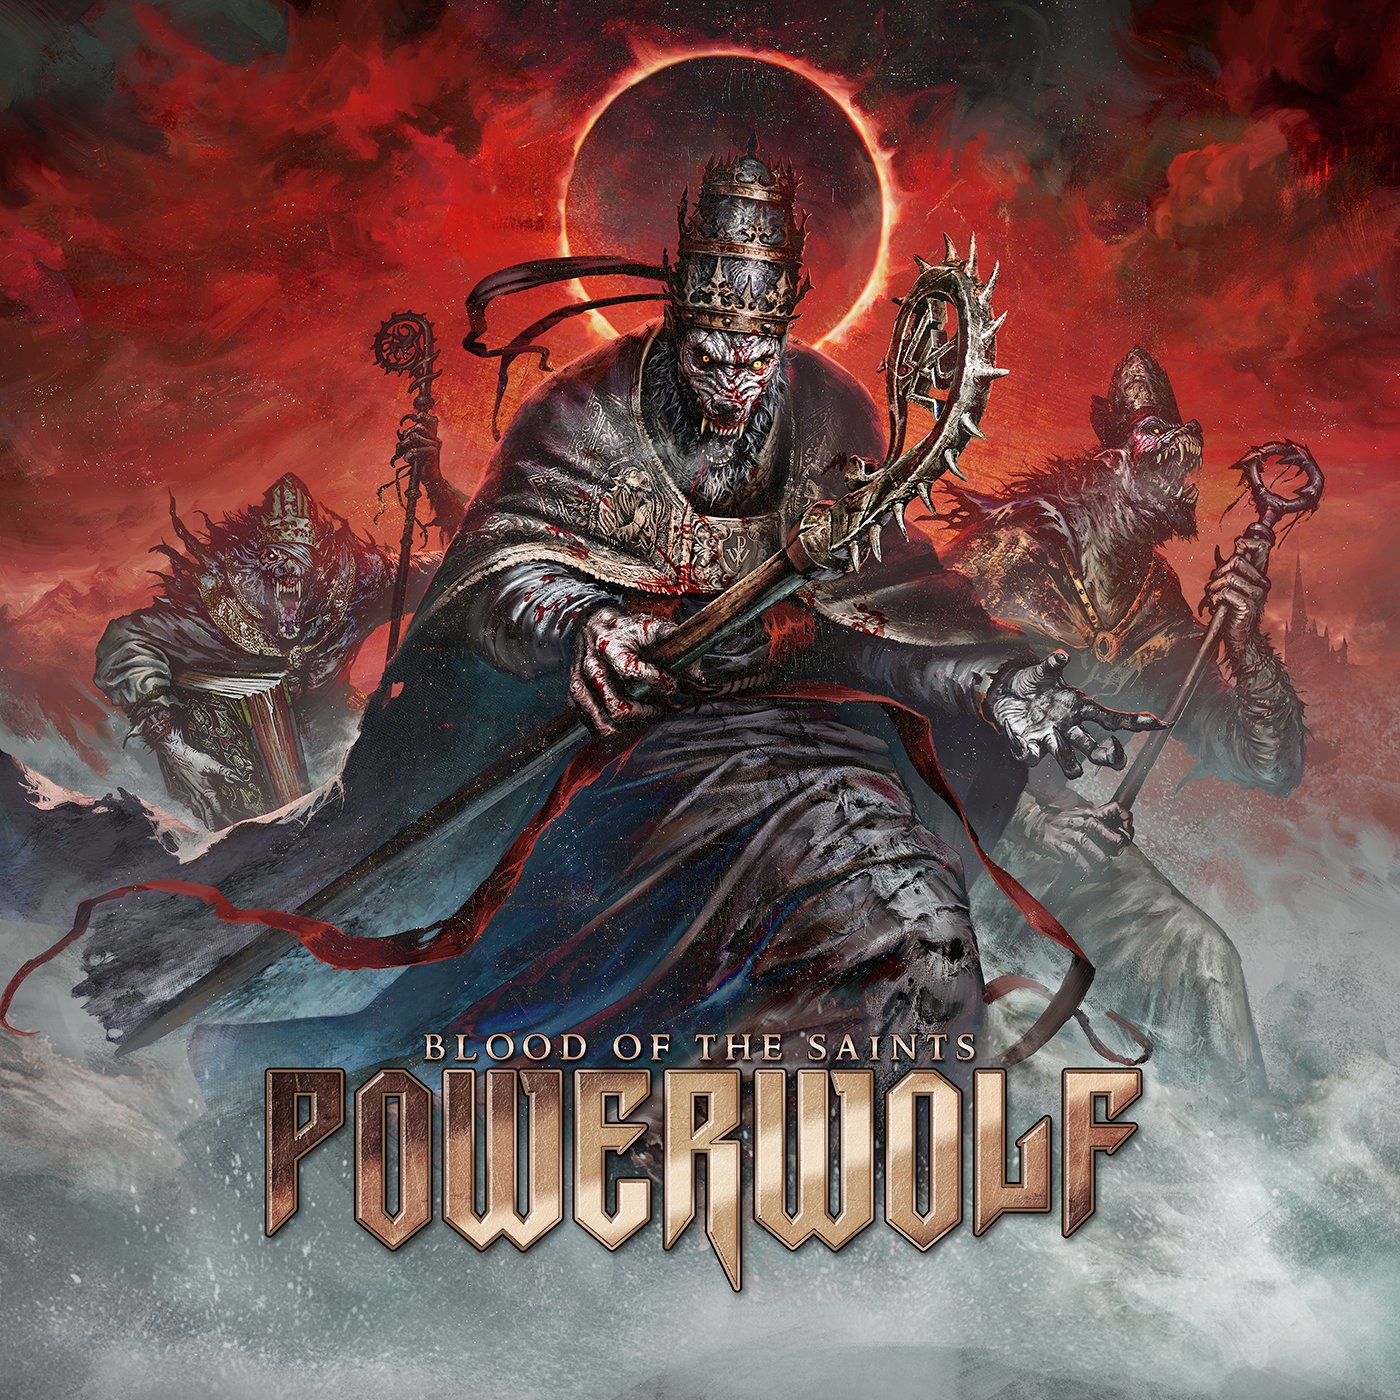 Powerwolf on Twitter: "Friends, today we have a very special surprise for  you! To celebrate the 10th anniversary of "Blood Of The Saints" this year,  we have teamed up with Metal Blade